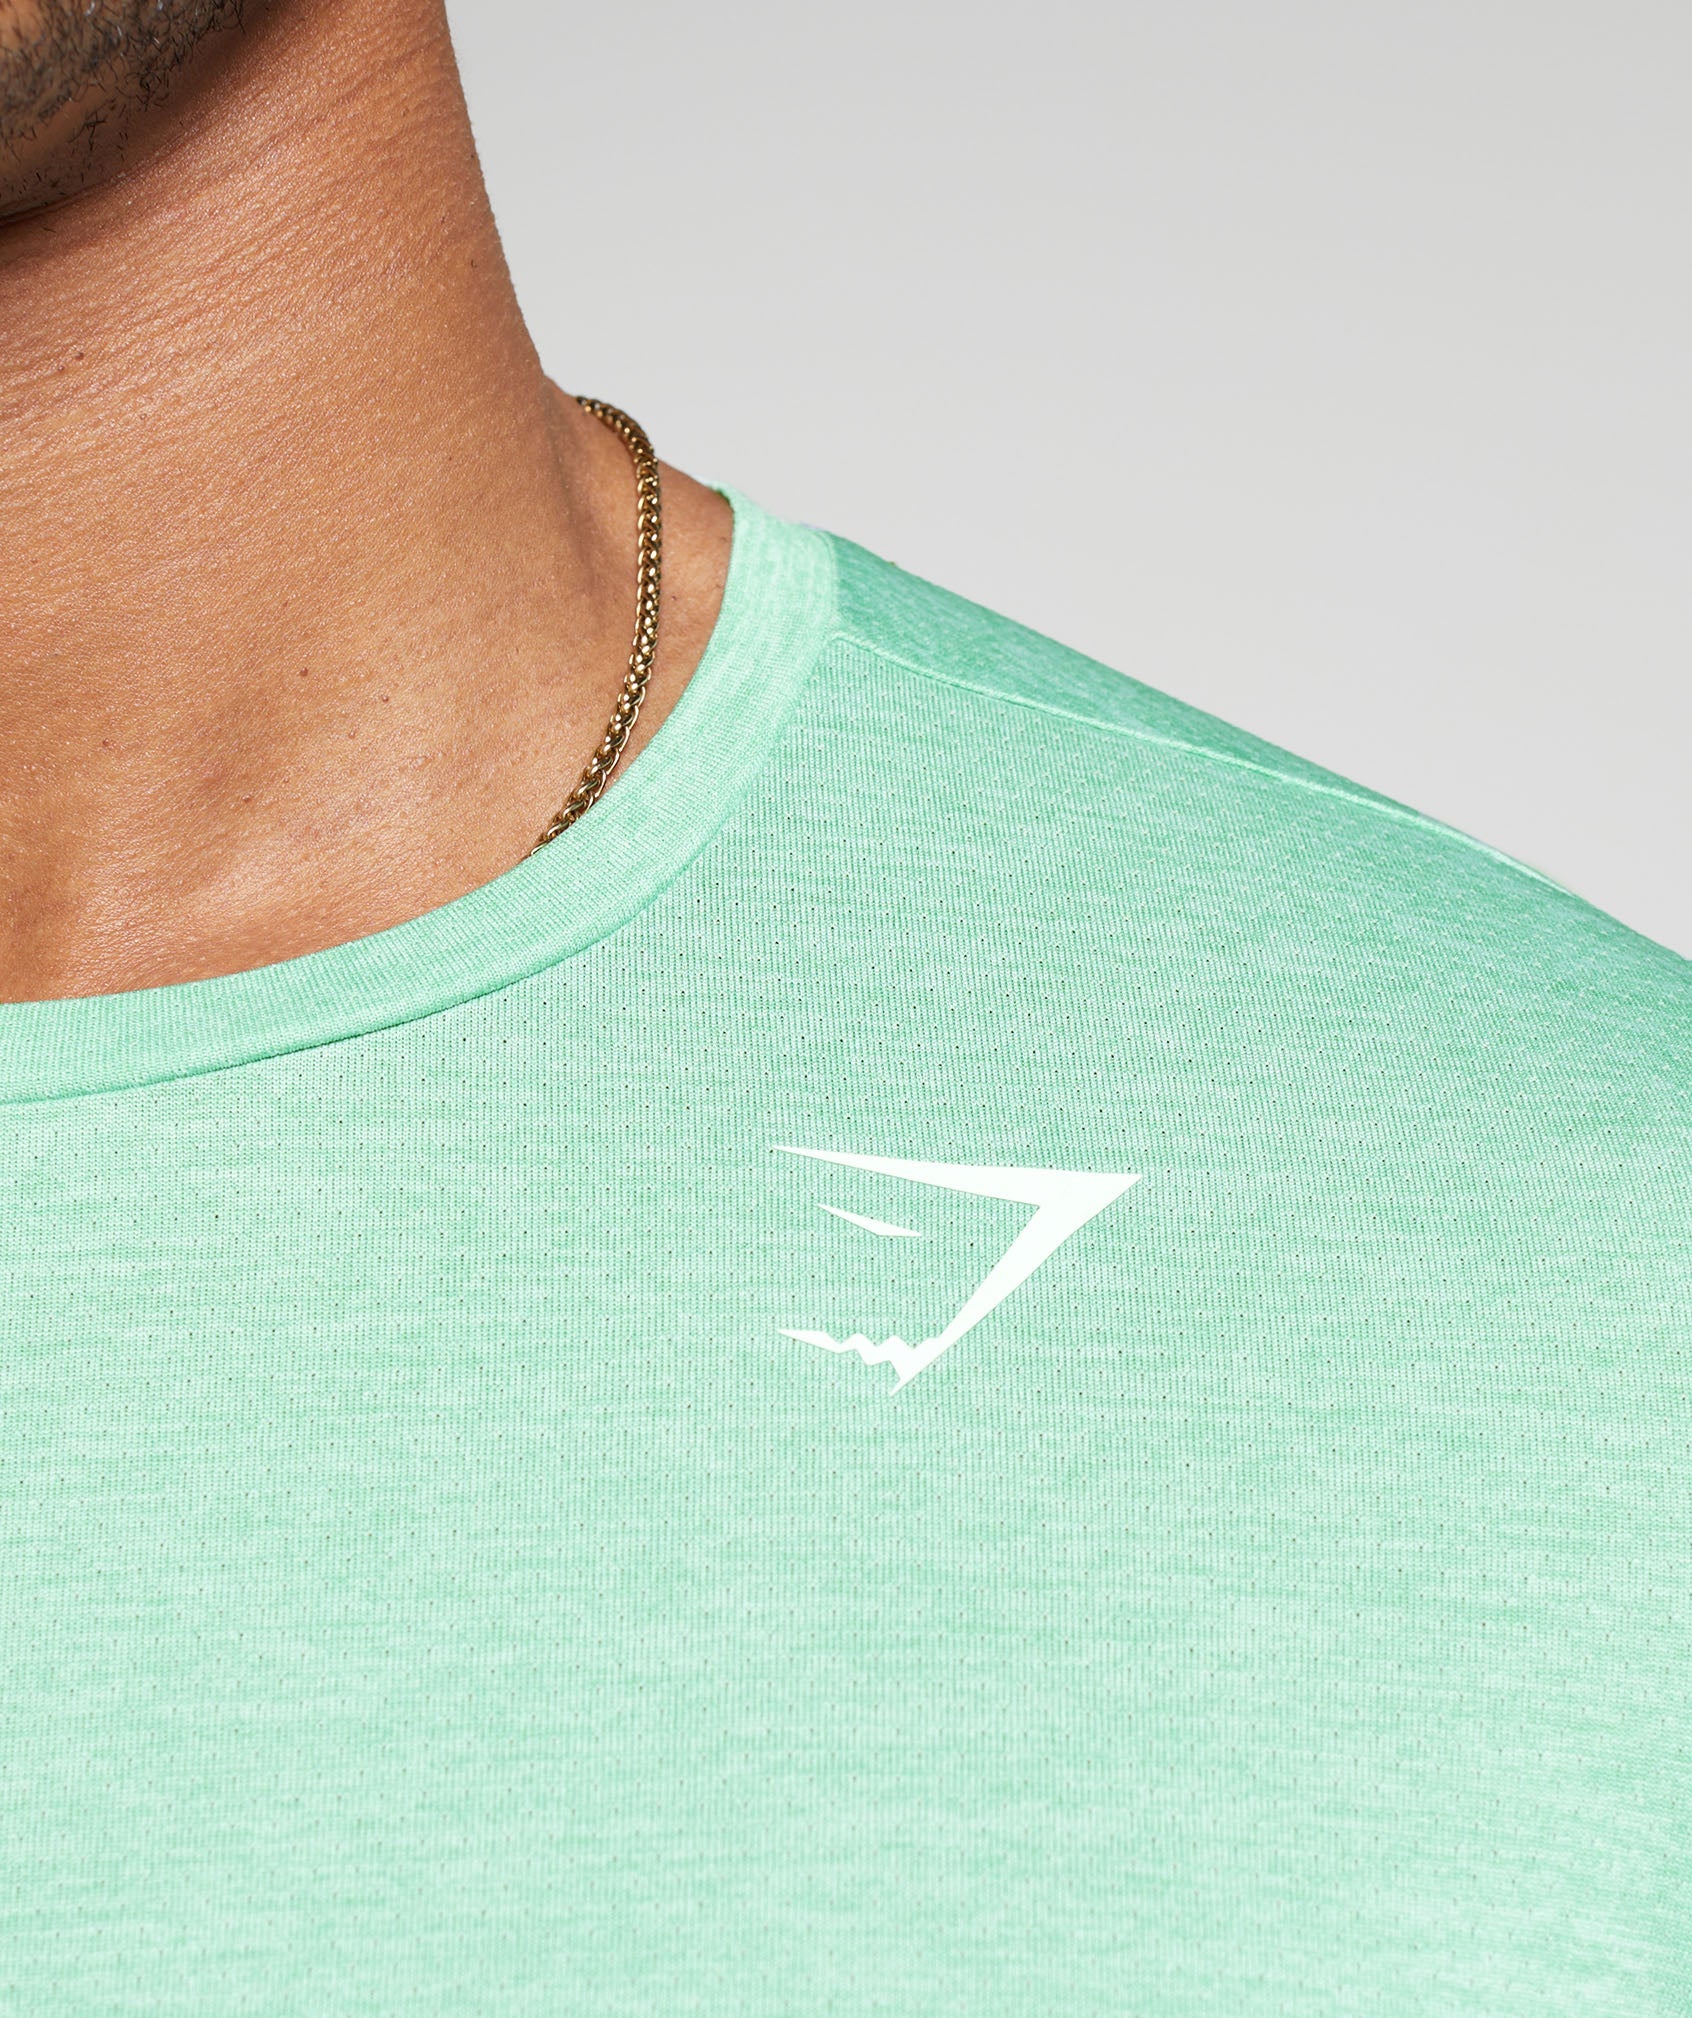 Arrival Marl T-Shirt in Lido Green/White Marl - view 5